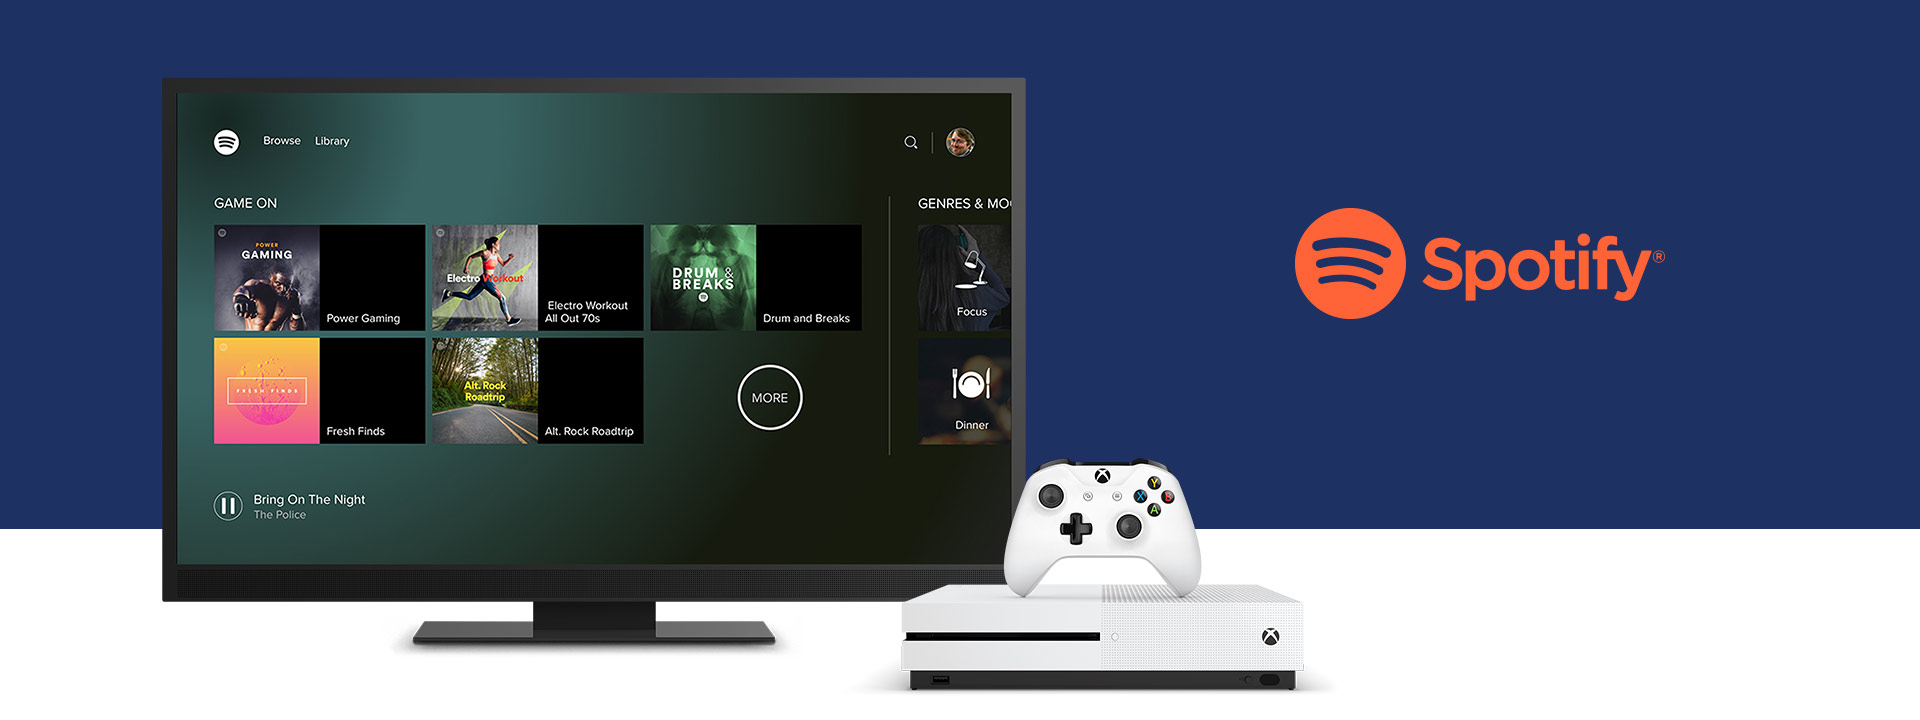 xbox game pass ultimate spotfy discord pc